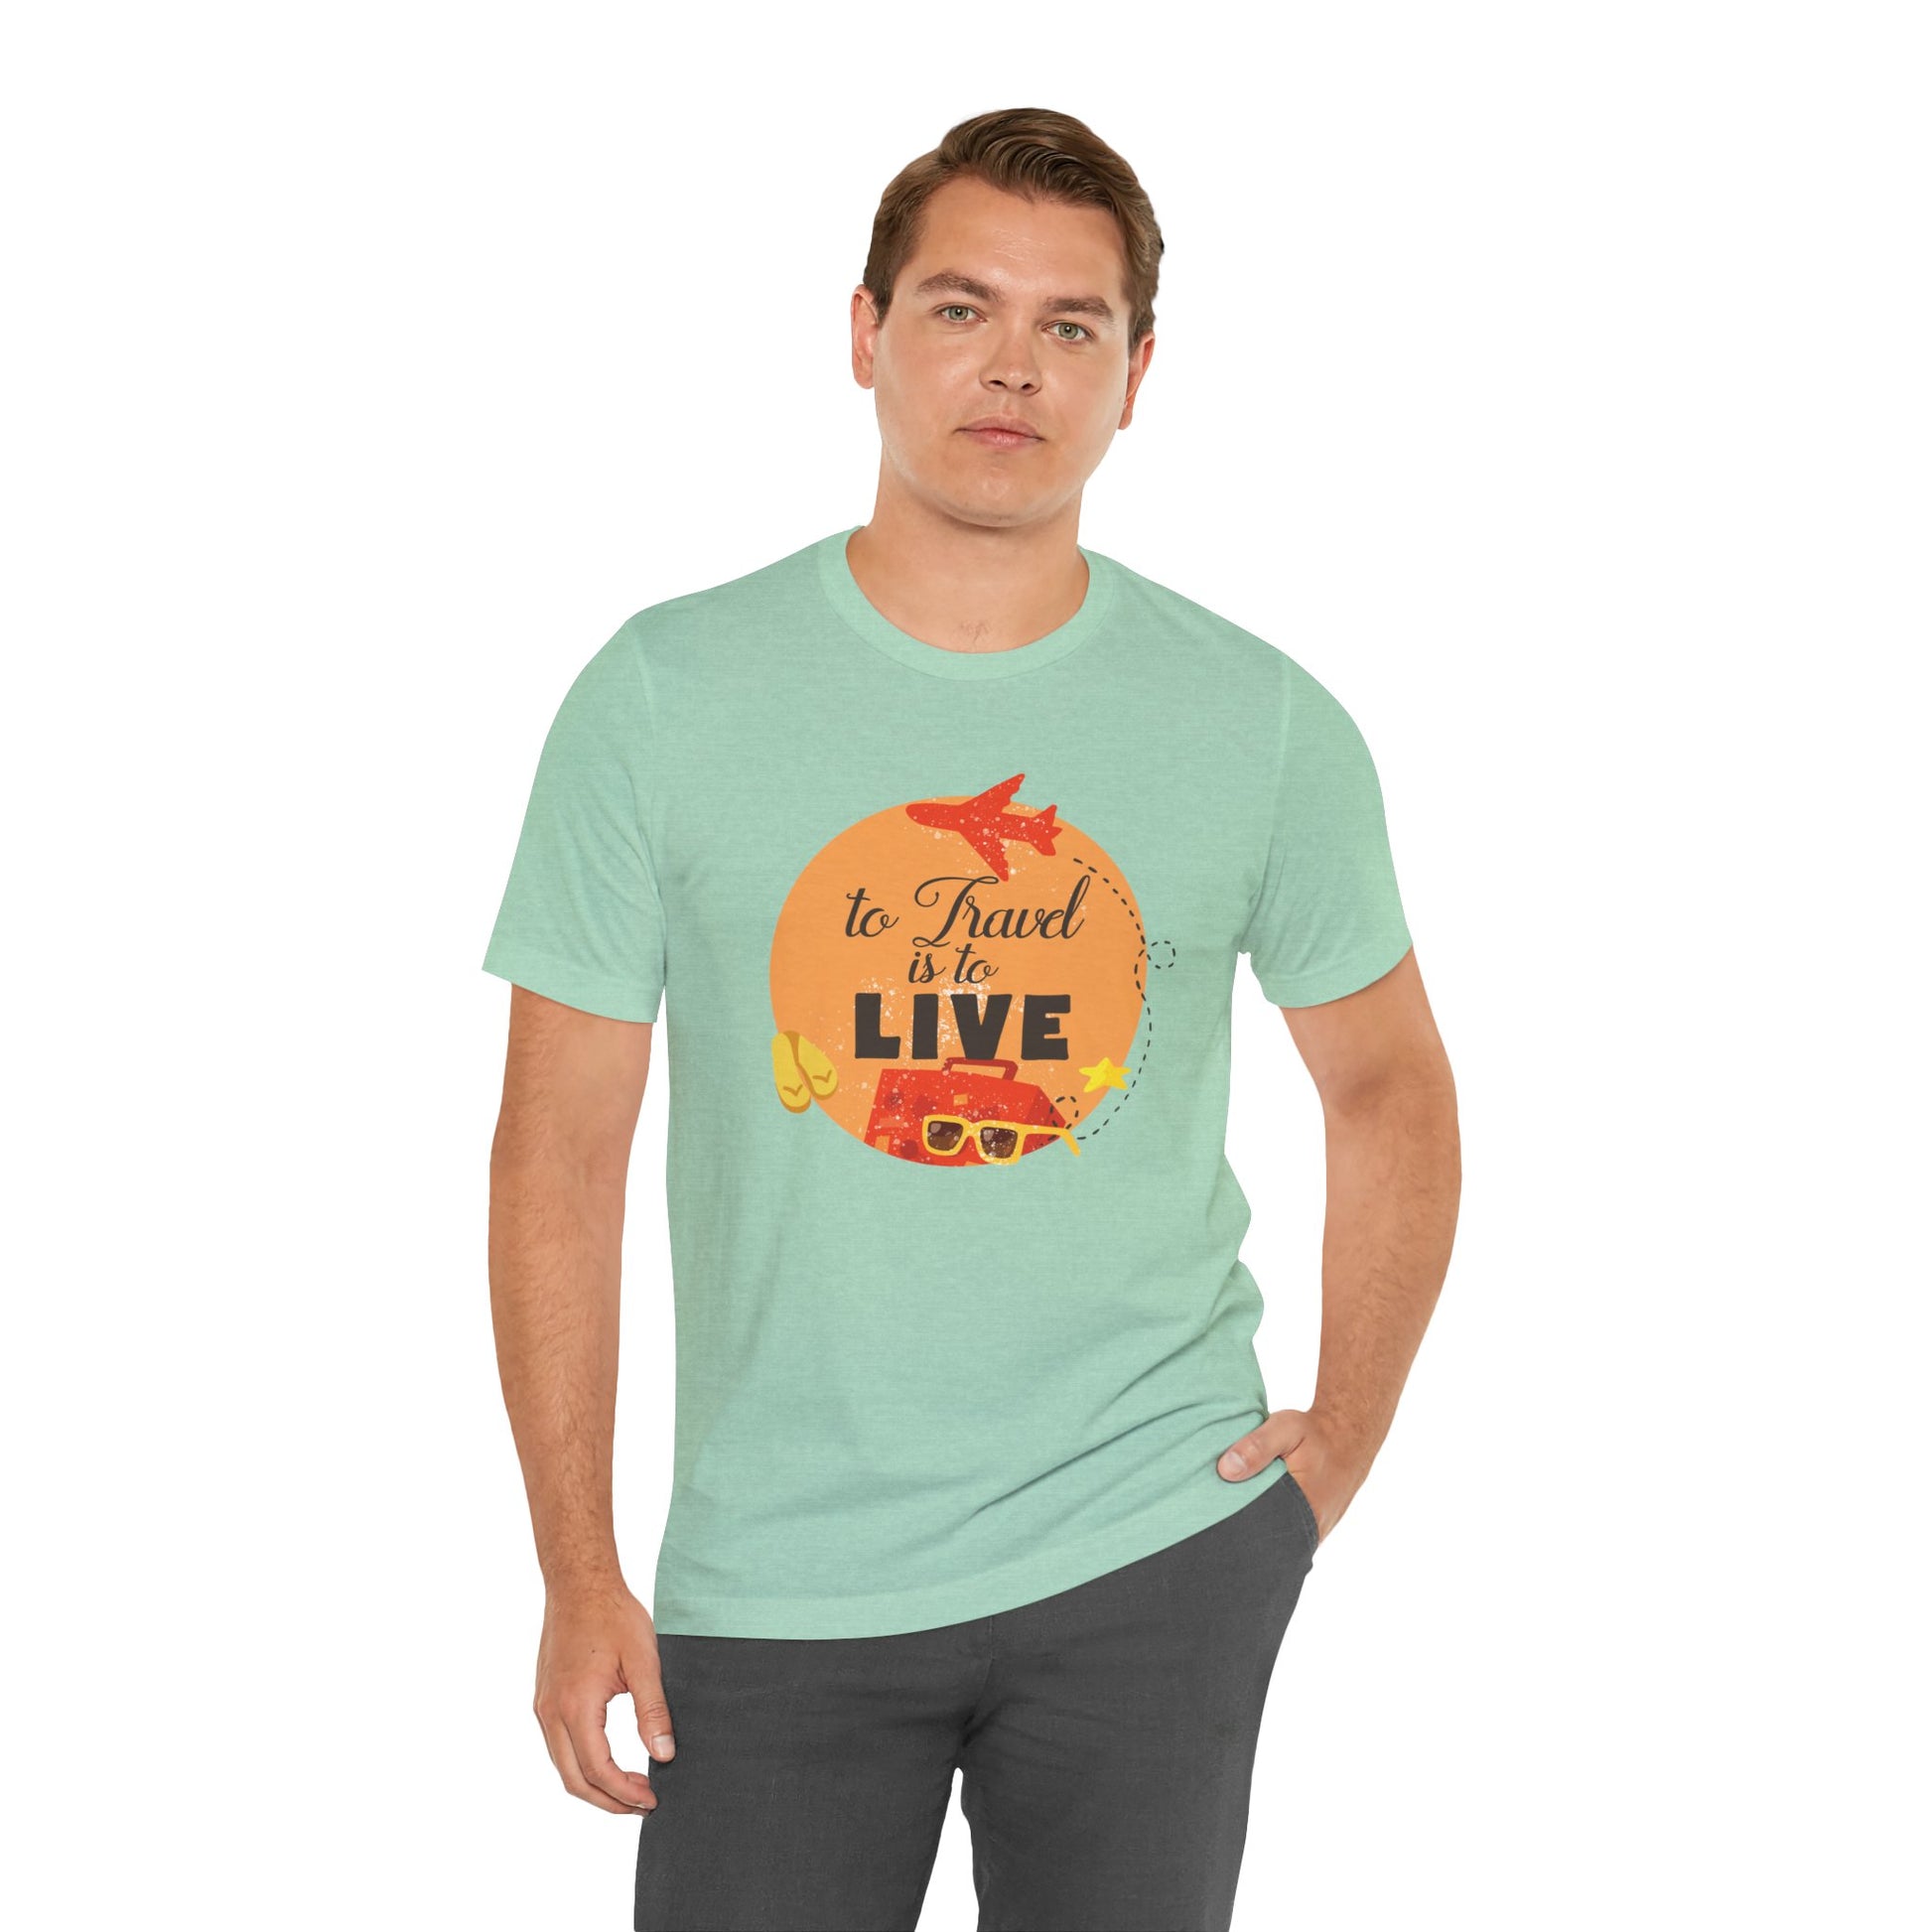 To Travel is to Live Motivational Quote Short Sleeve T-Shirt - Unisex - Motivational Treats